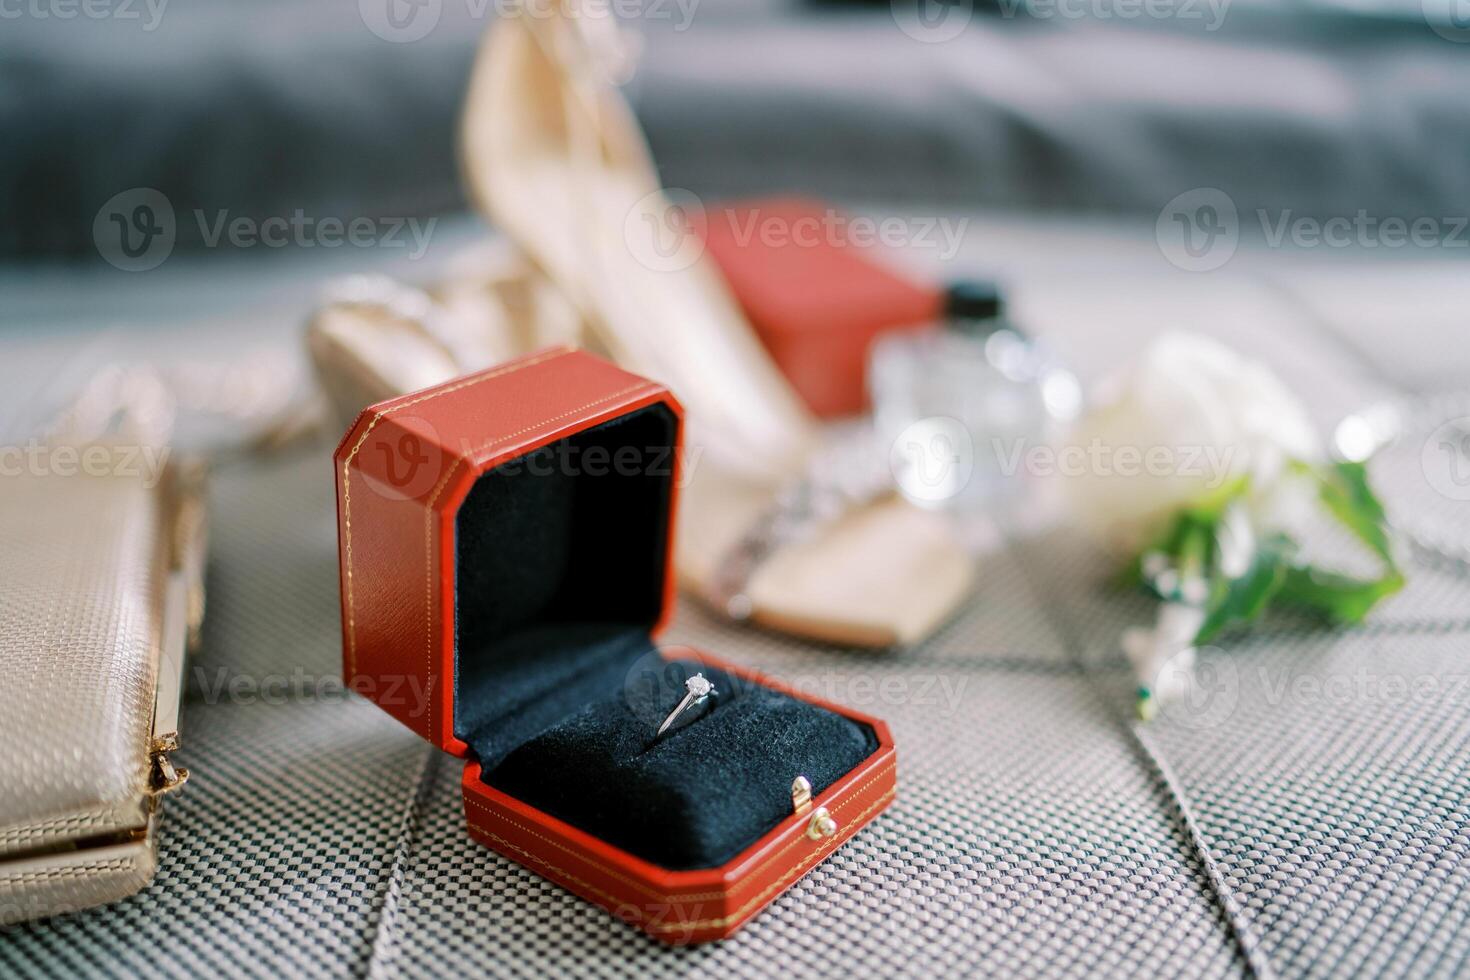 Wedding ring in a red box lies on the sofa next to the bride clutch photo